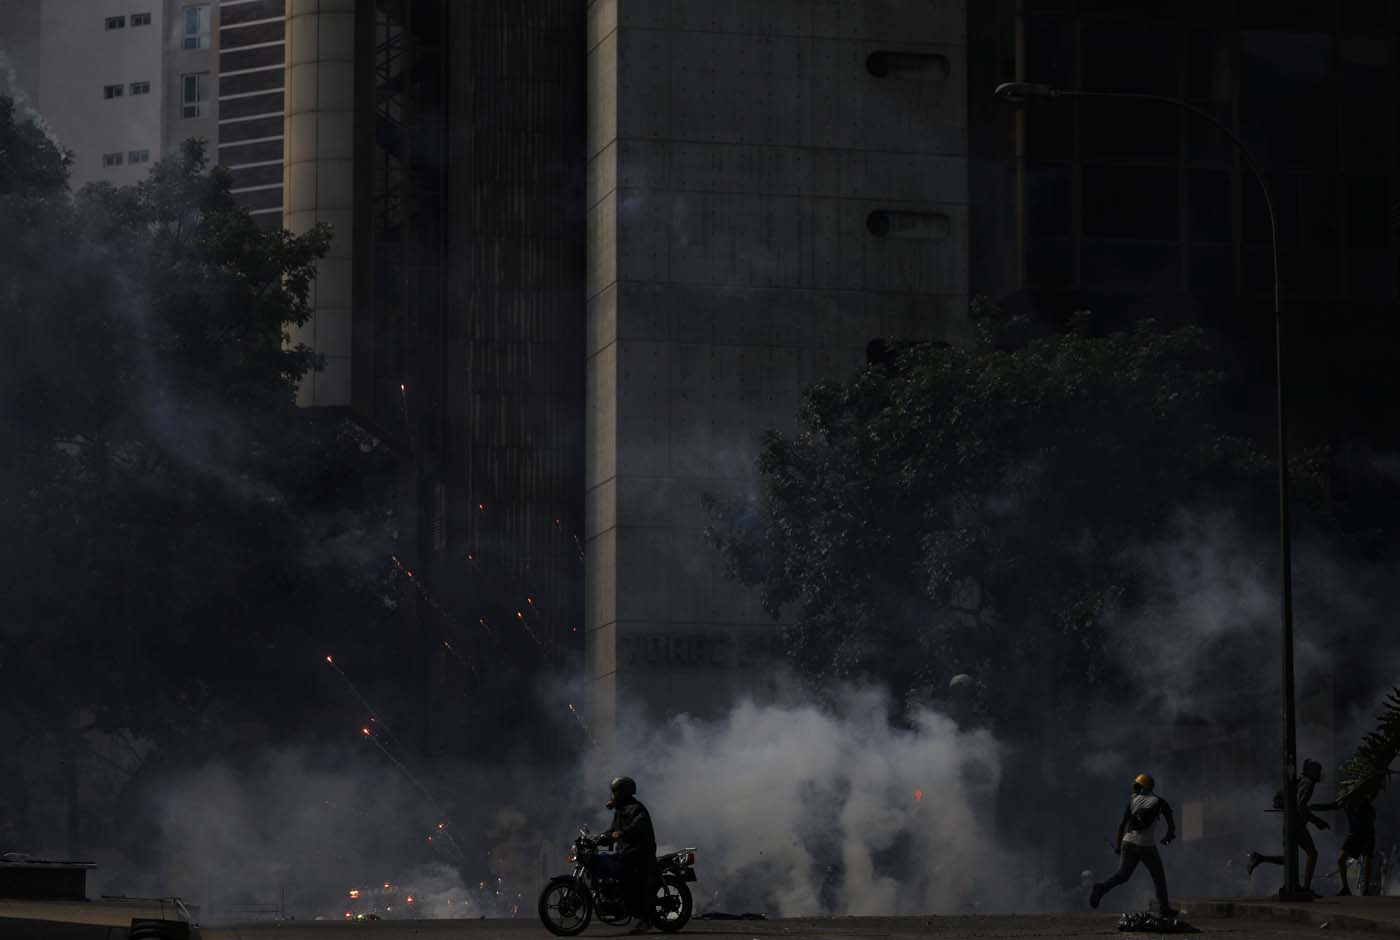 Opposition supporters clash with security forces during a rally against Venezuela's President Nicolas Maduro in Caracas, Venezuela May 20, 2017. REUTERS/Carlos Barria